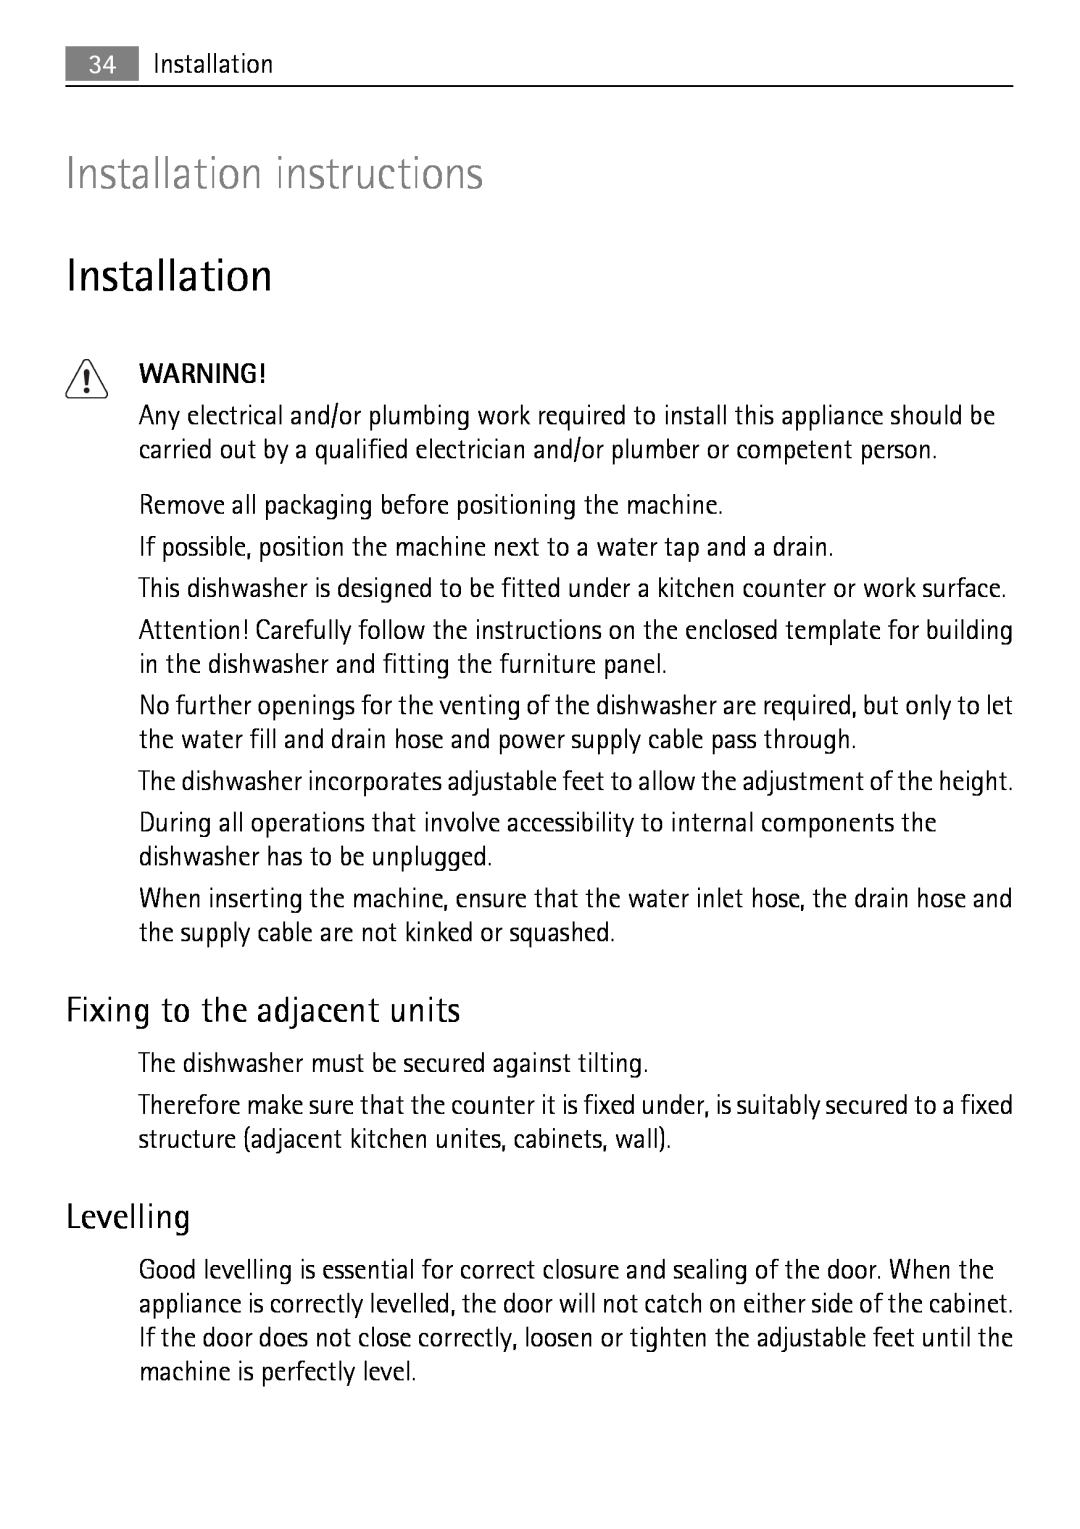 Electrolux 65011 VI user manual Installation instructions, Fixing to the adjacent units, Levelling 